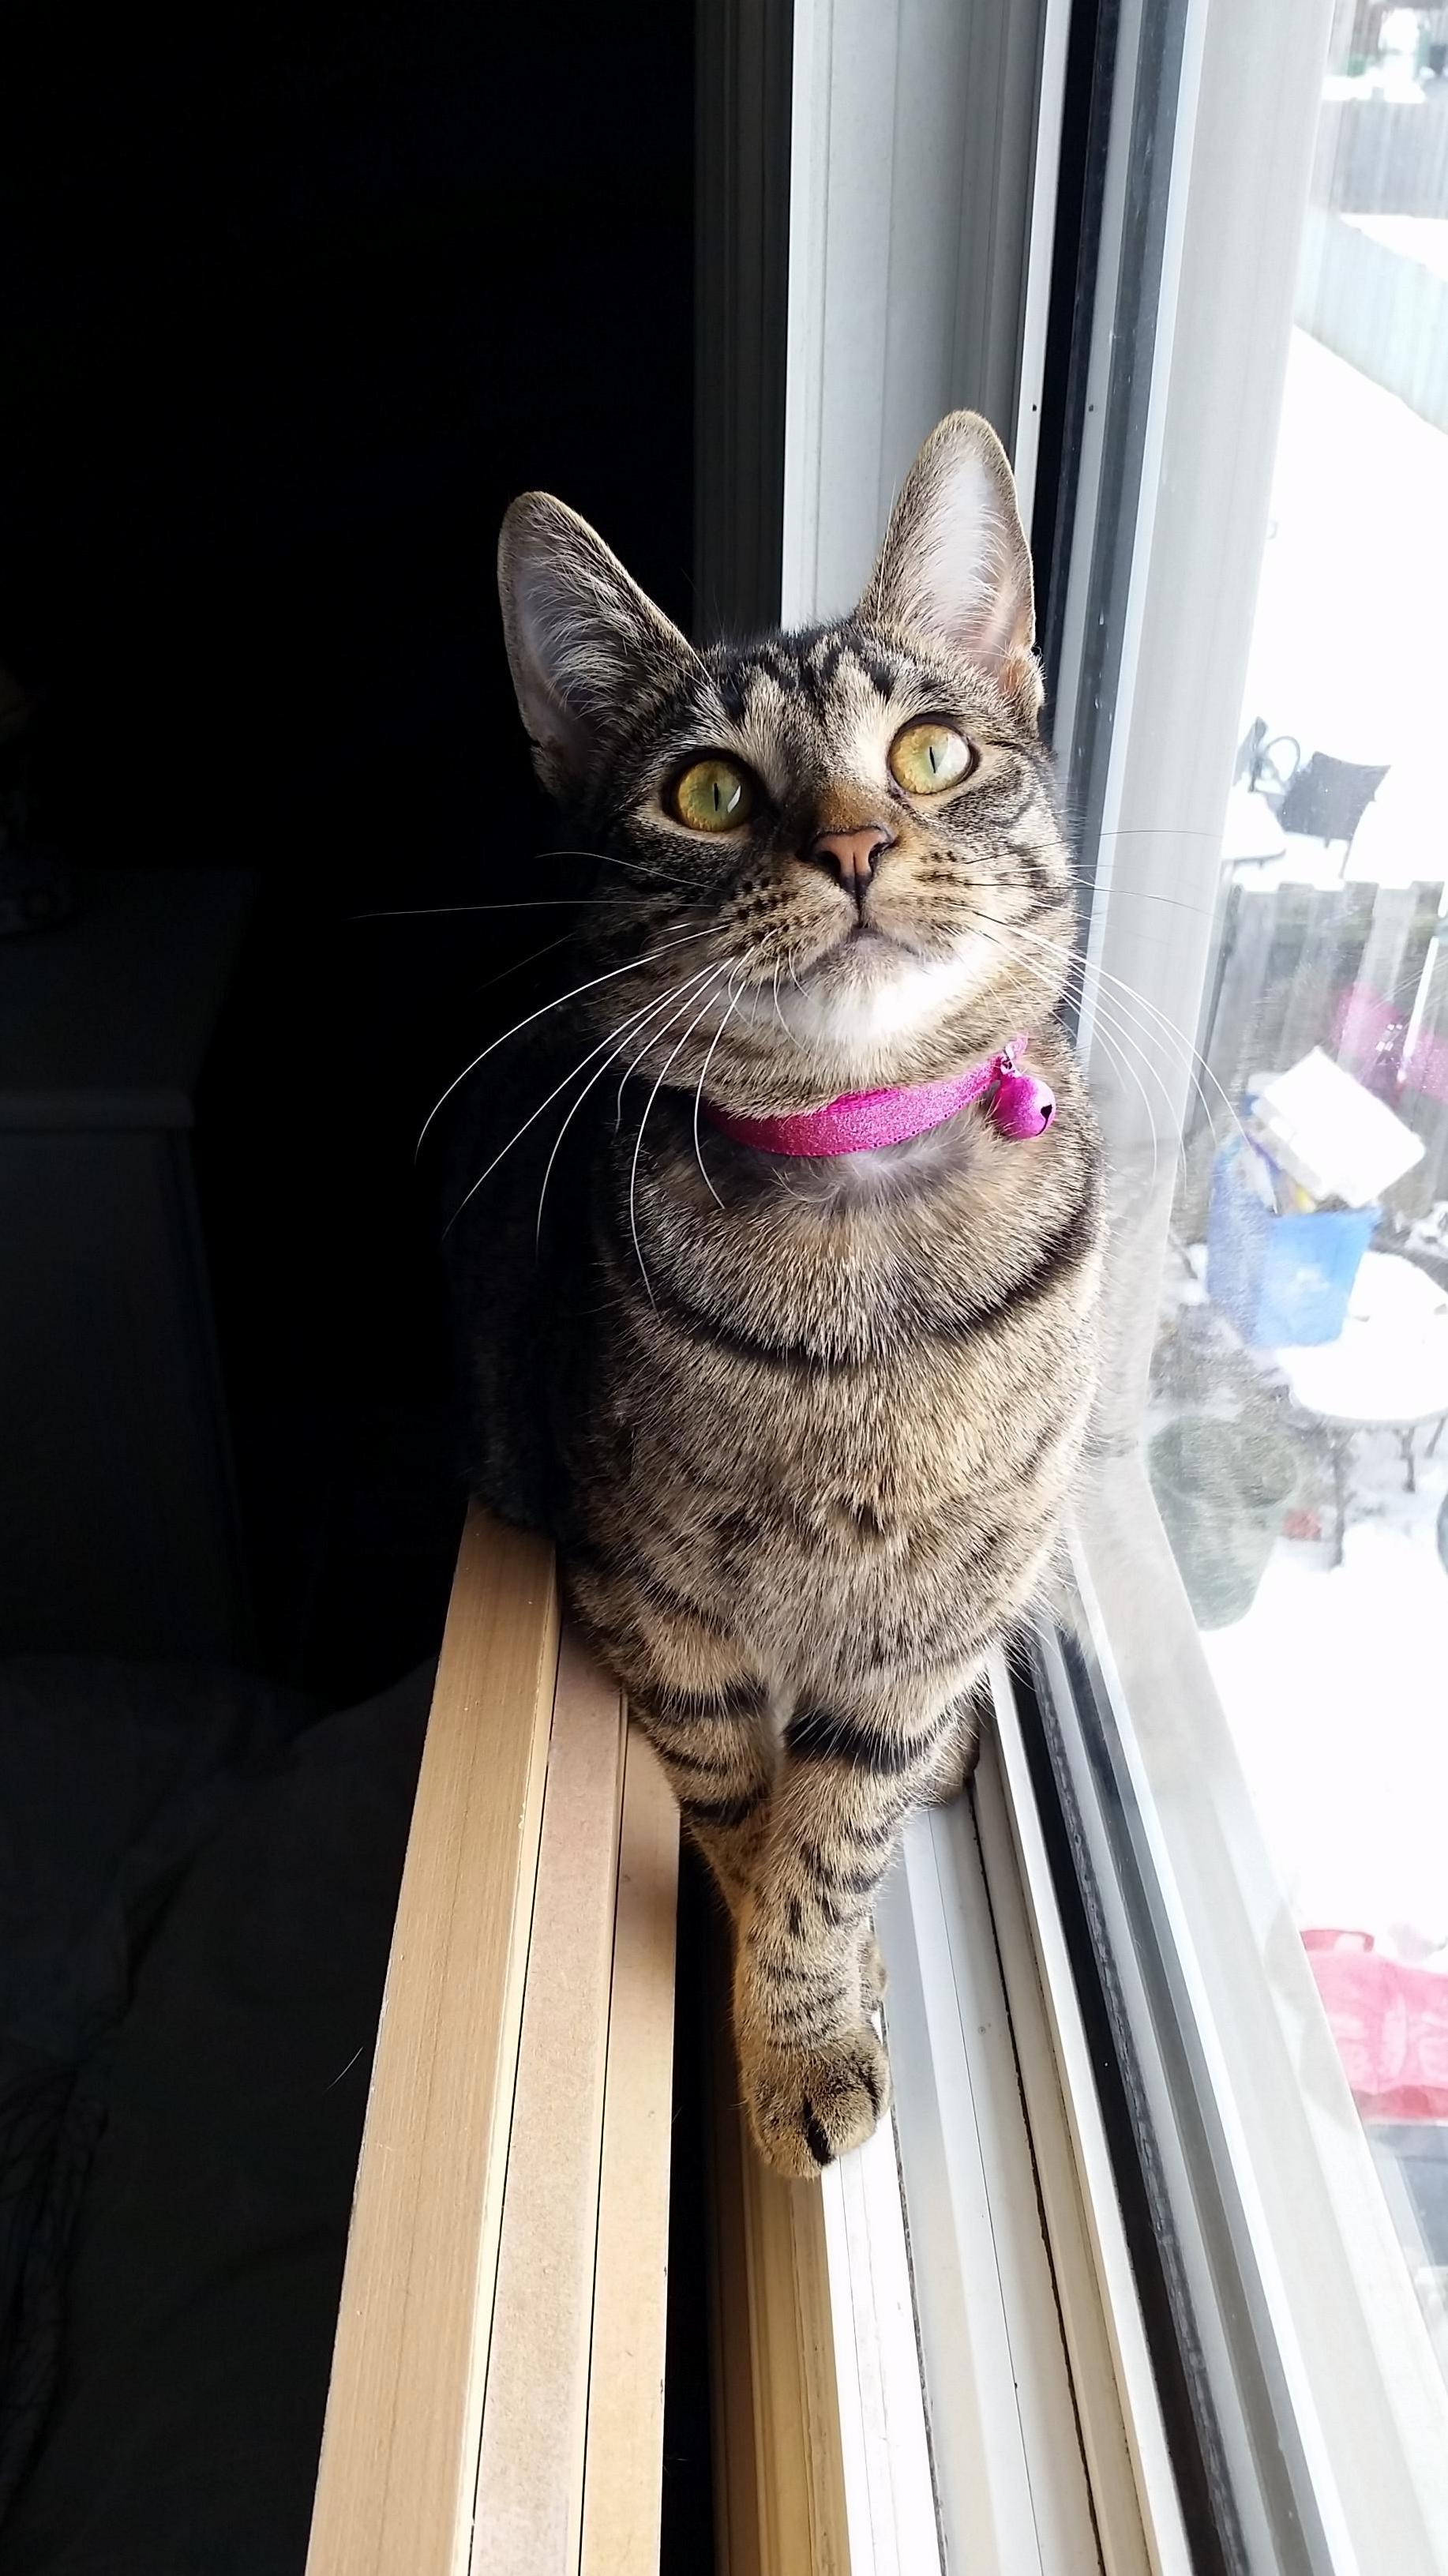 Lila loves sitting in the window sill and watching outside.